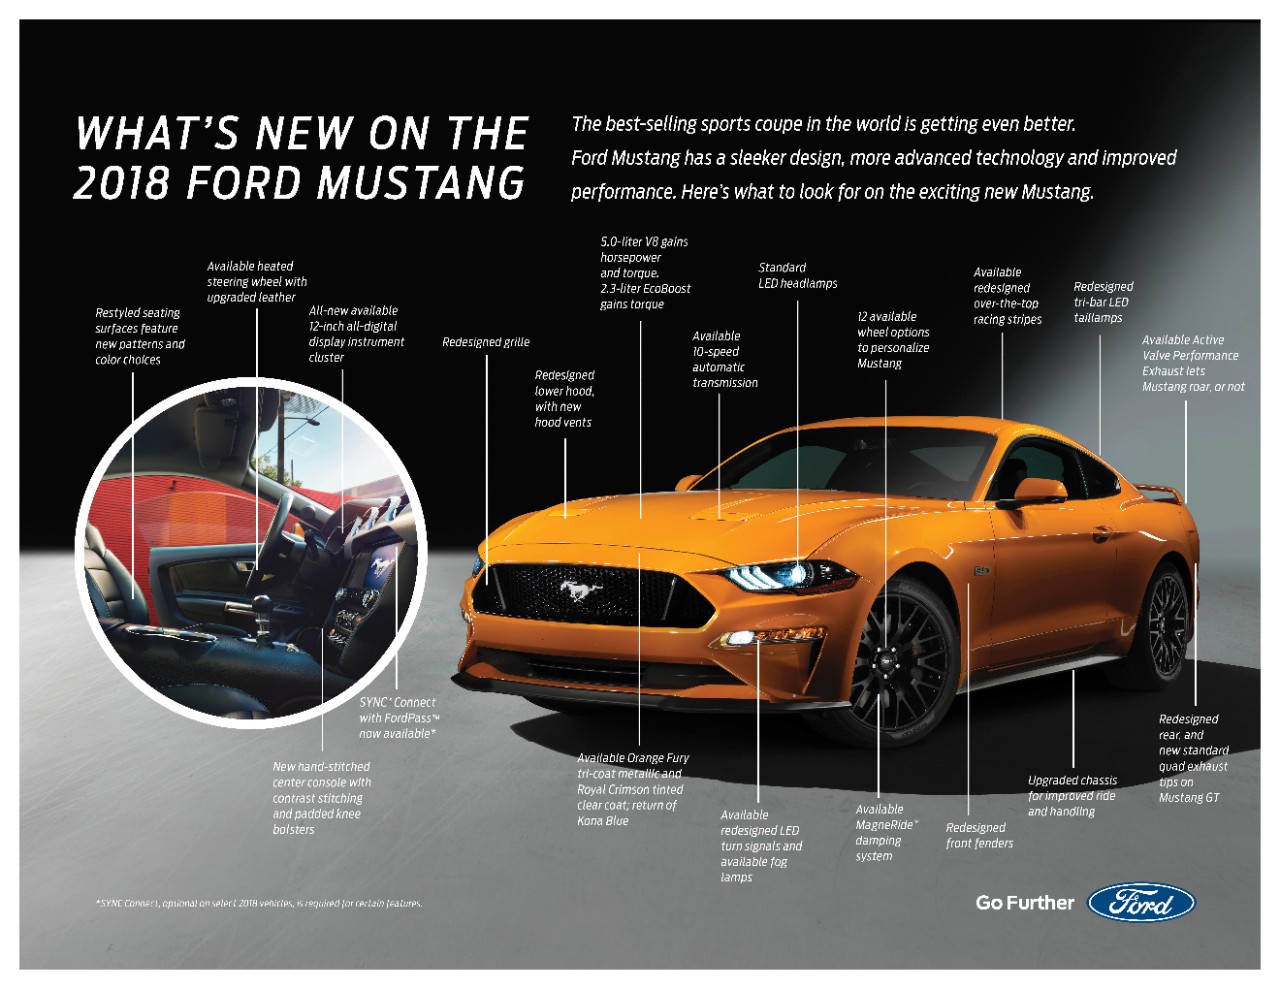 What's New on the 2018 Ford Mustang